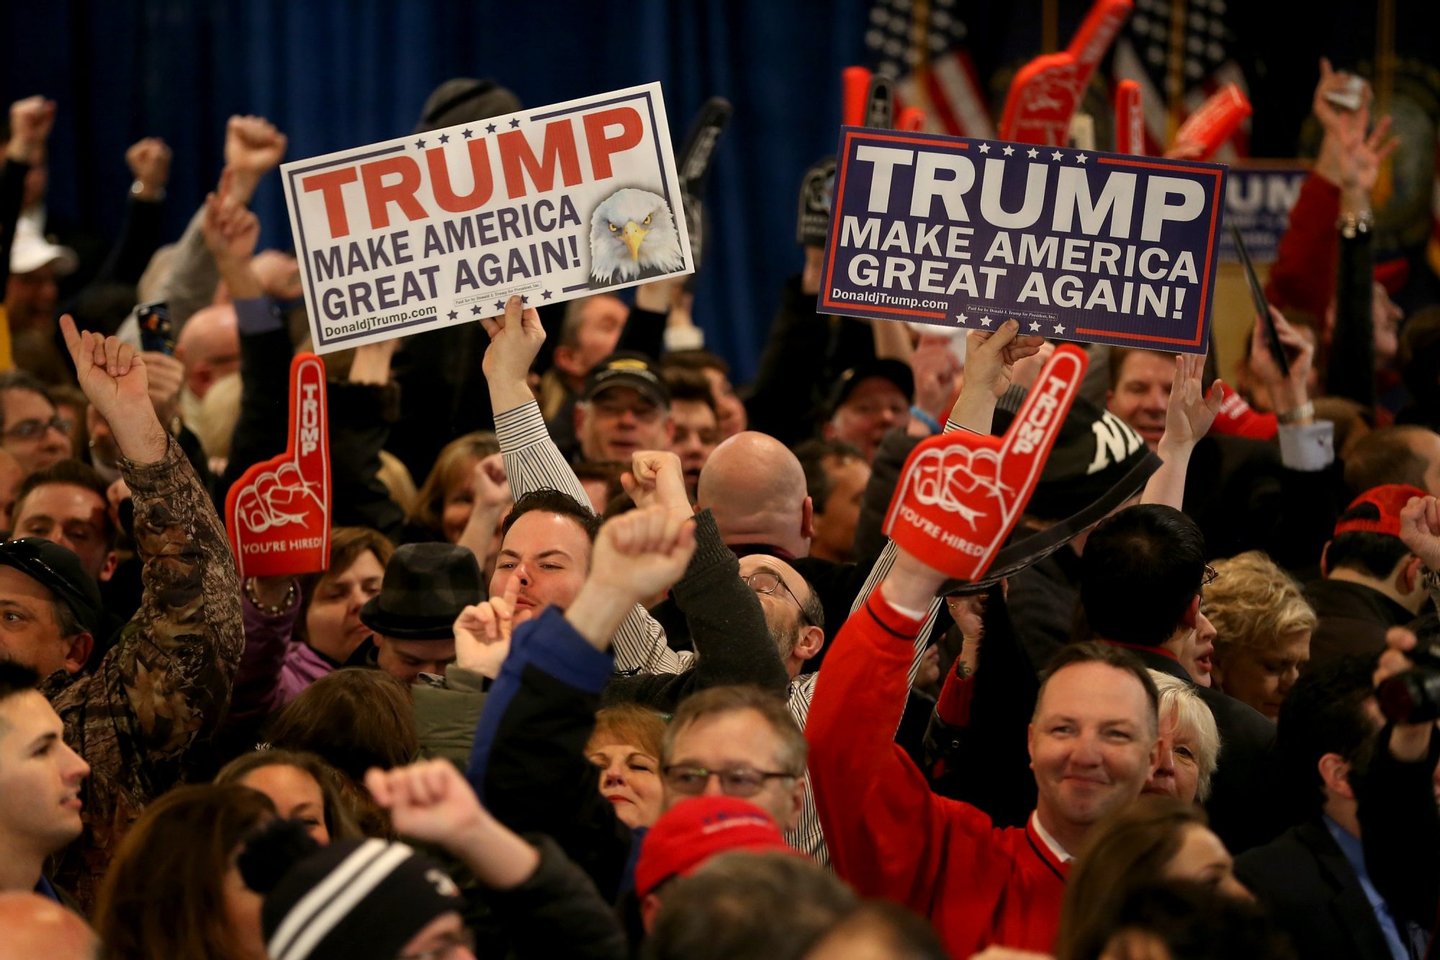 MANCHESTER, NH - FEBRUARY 09: Supporters cheer for Donald Trump during a New Hampshire Primary Night Gathering In Manchester on February 9, 2016 in Manchester, New Hampshire. Trump was projected the Republican winner shortly after the polls closed. (Photo by Joe Raedle/Getty Images)